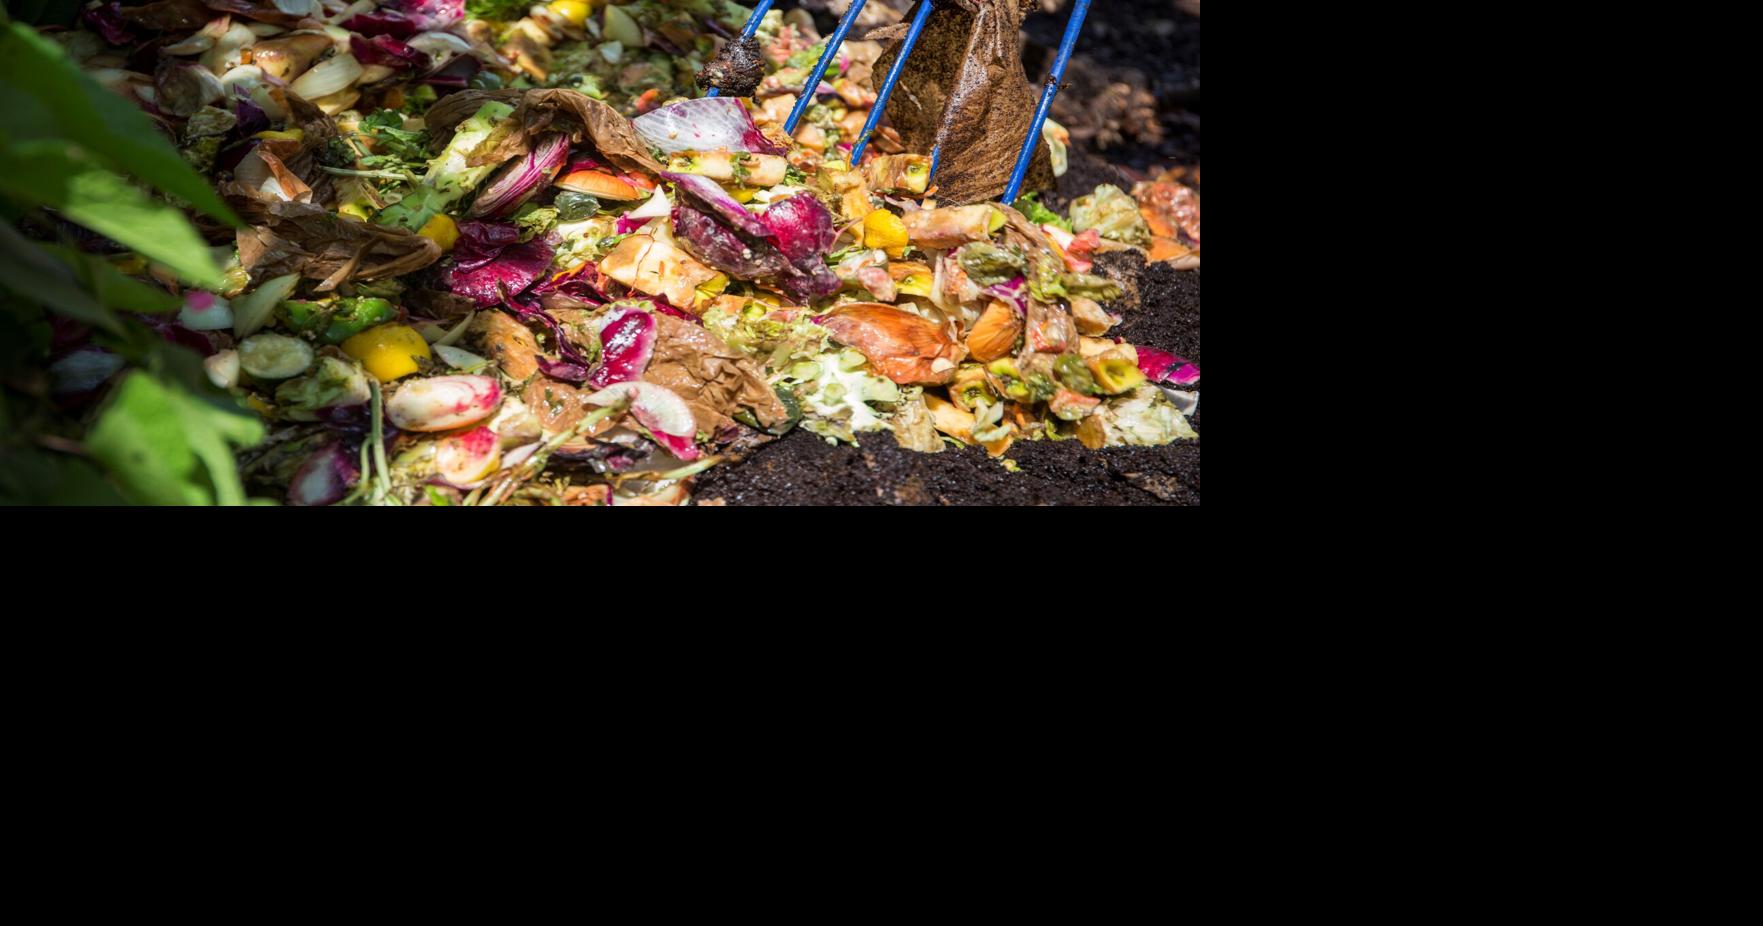 7 ways to reduce food waste - Mayo Clinic Health System